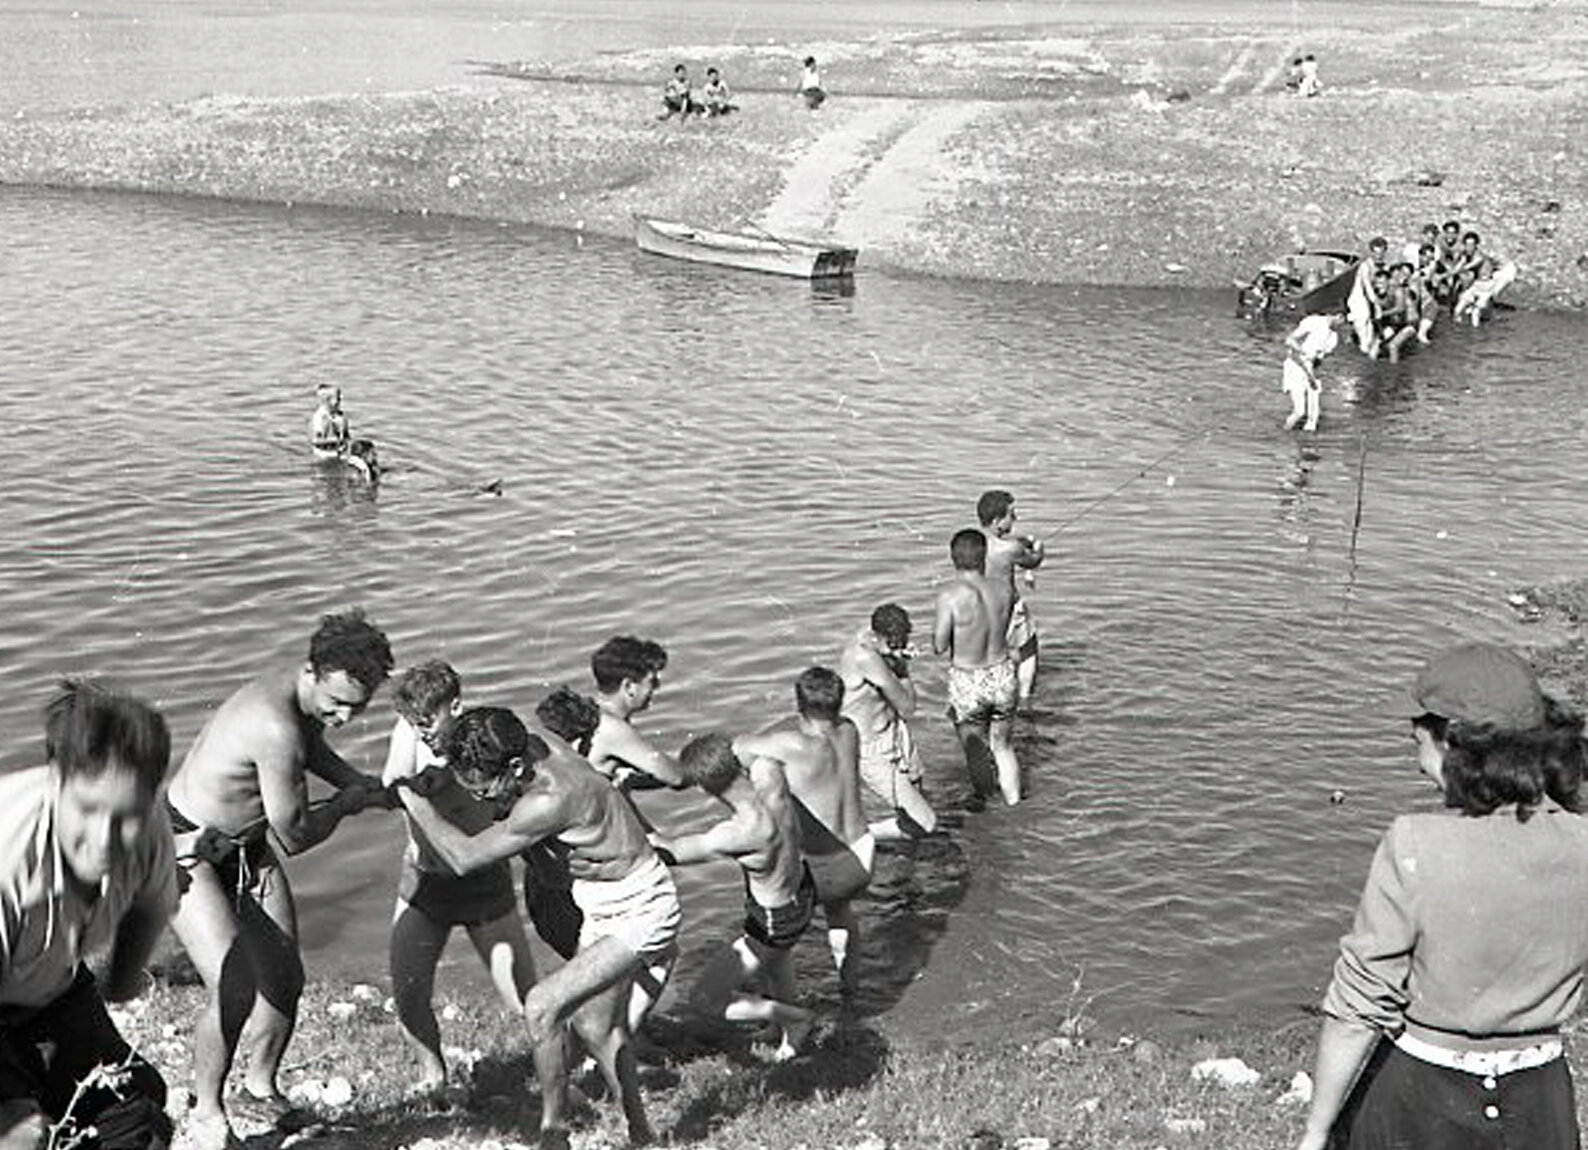 A JCC picnic at Sahuaro Lake in October 1947. Kids are playing tug-of-war and a don't drop the egg contests